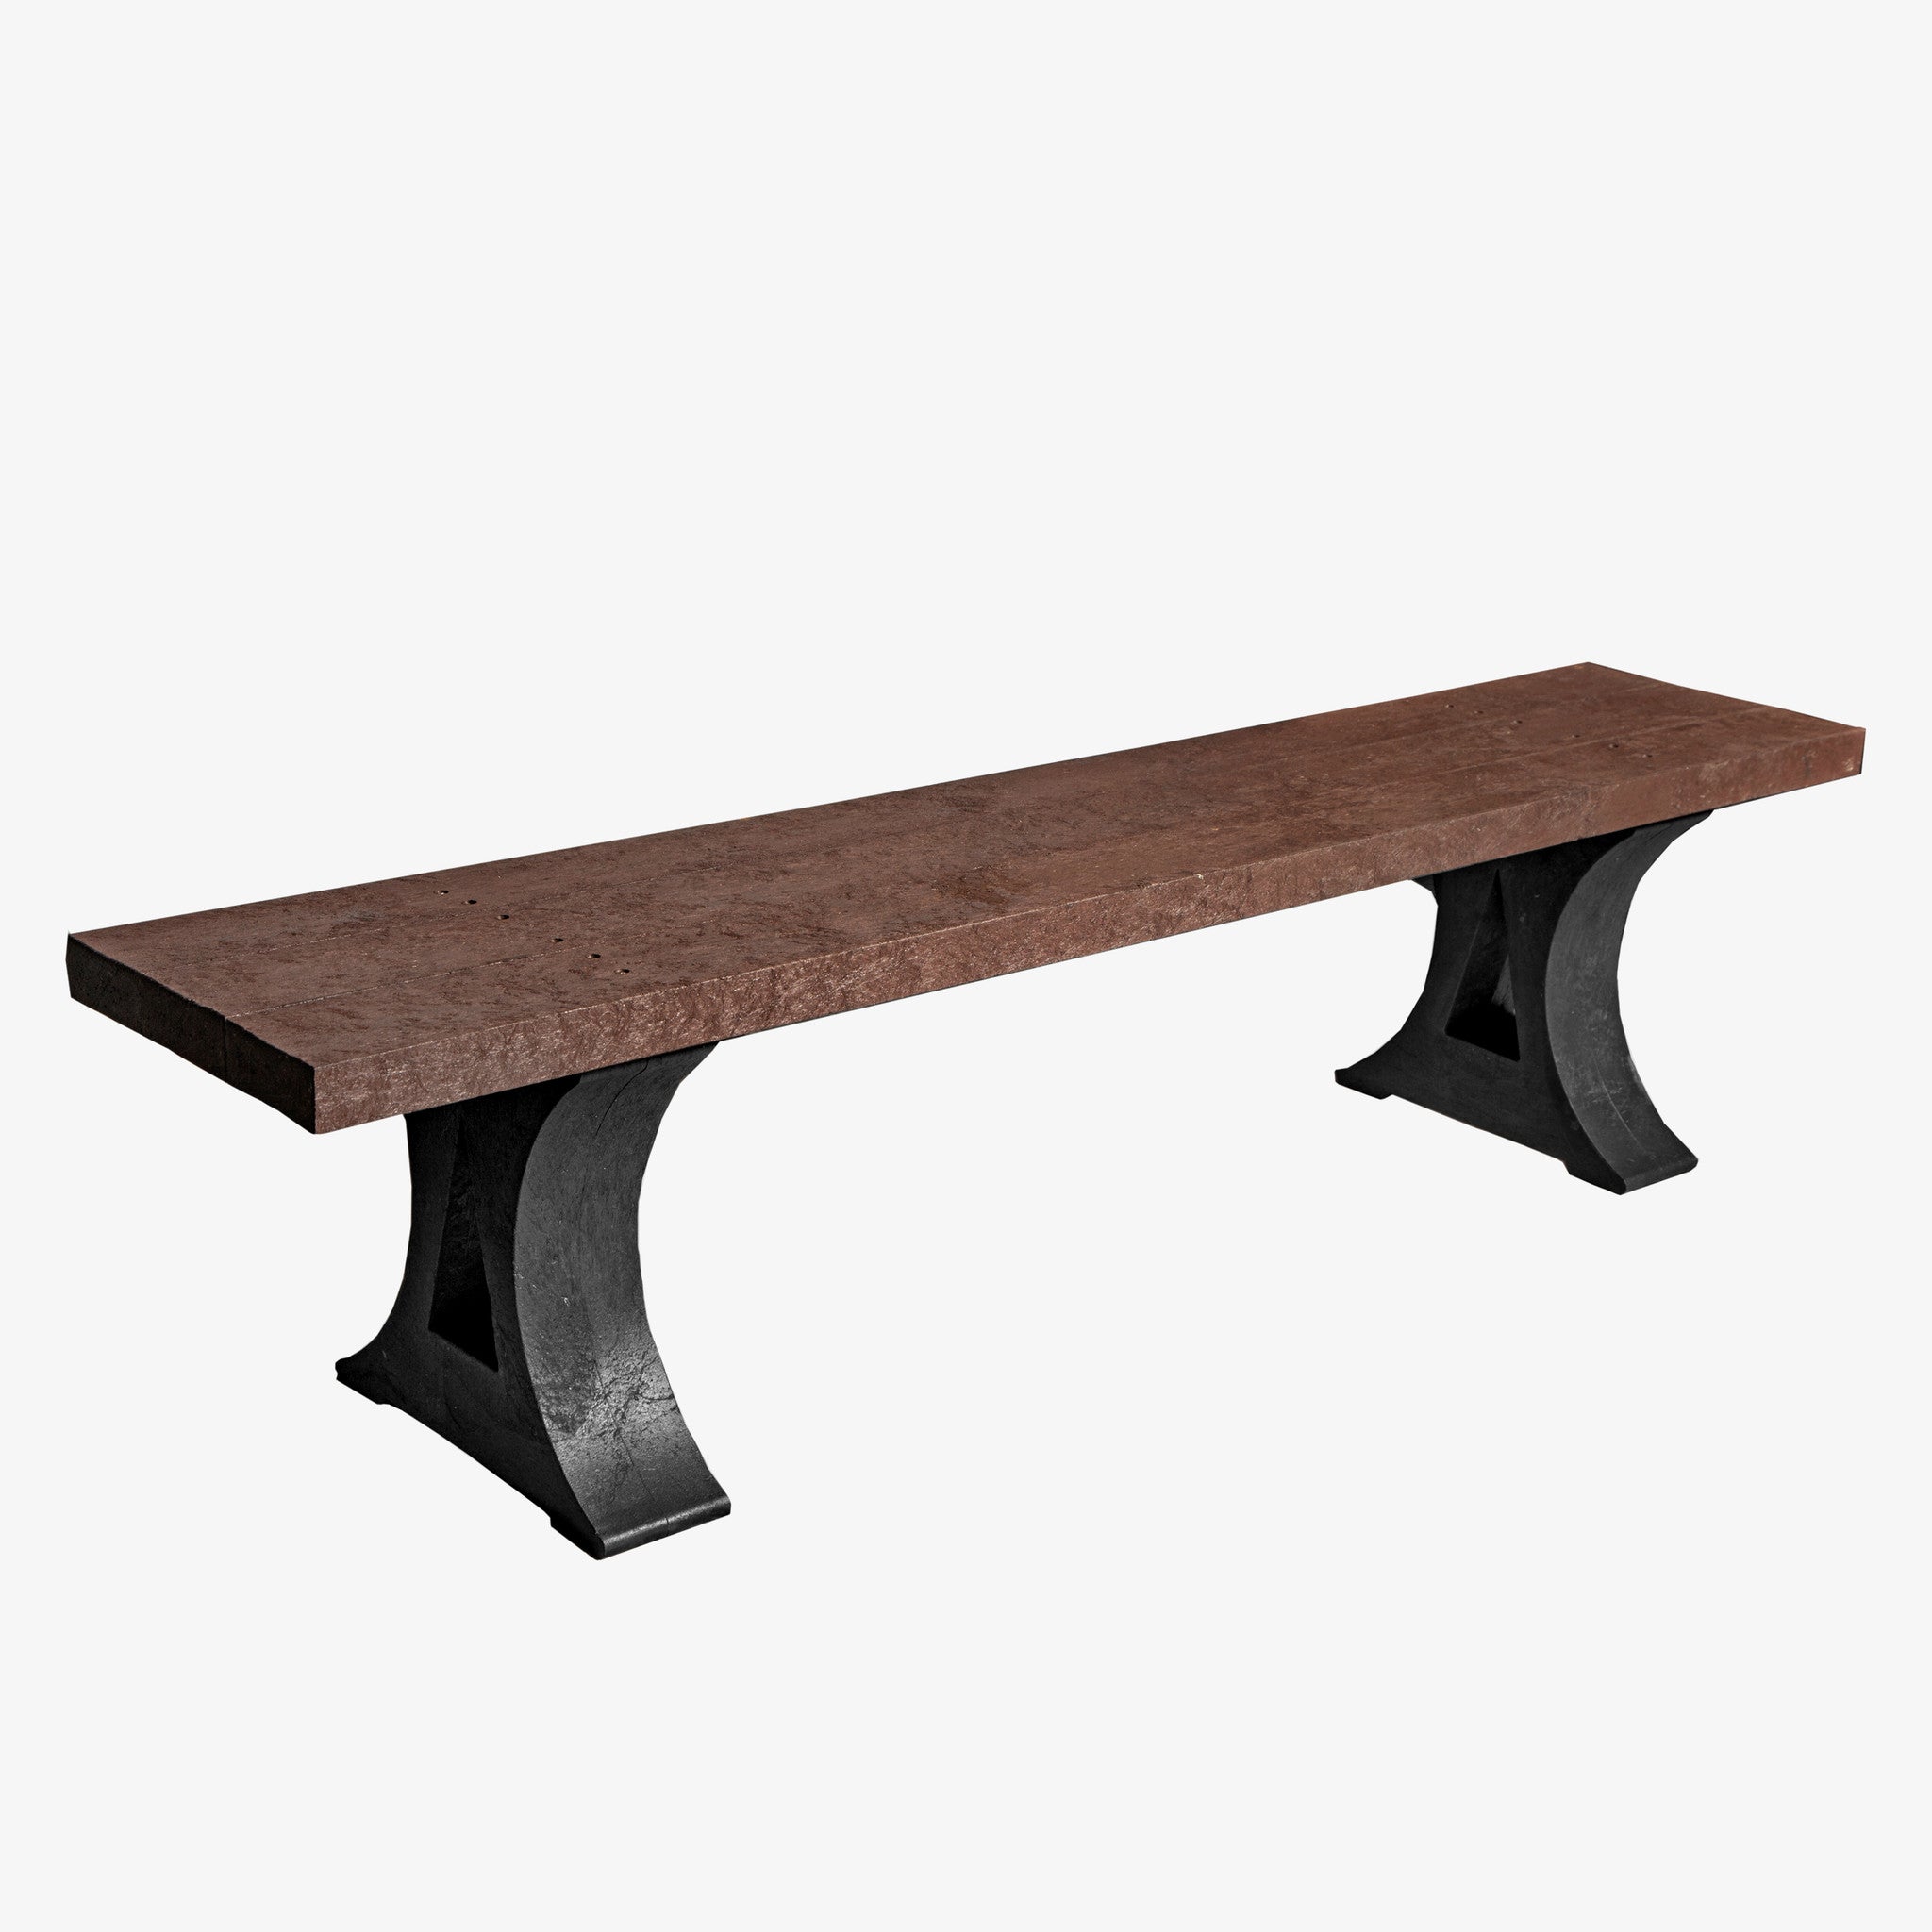 Manticore Lumber black & brown recycled plastic bench